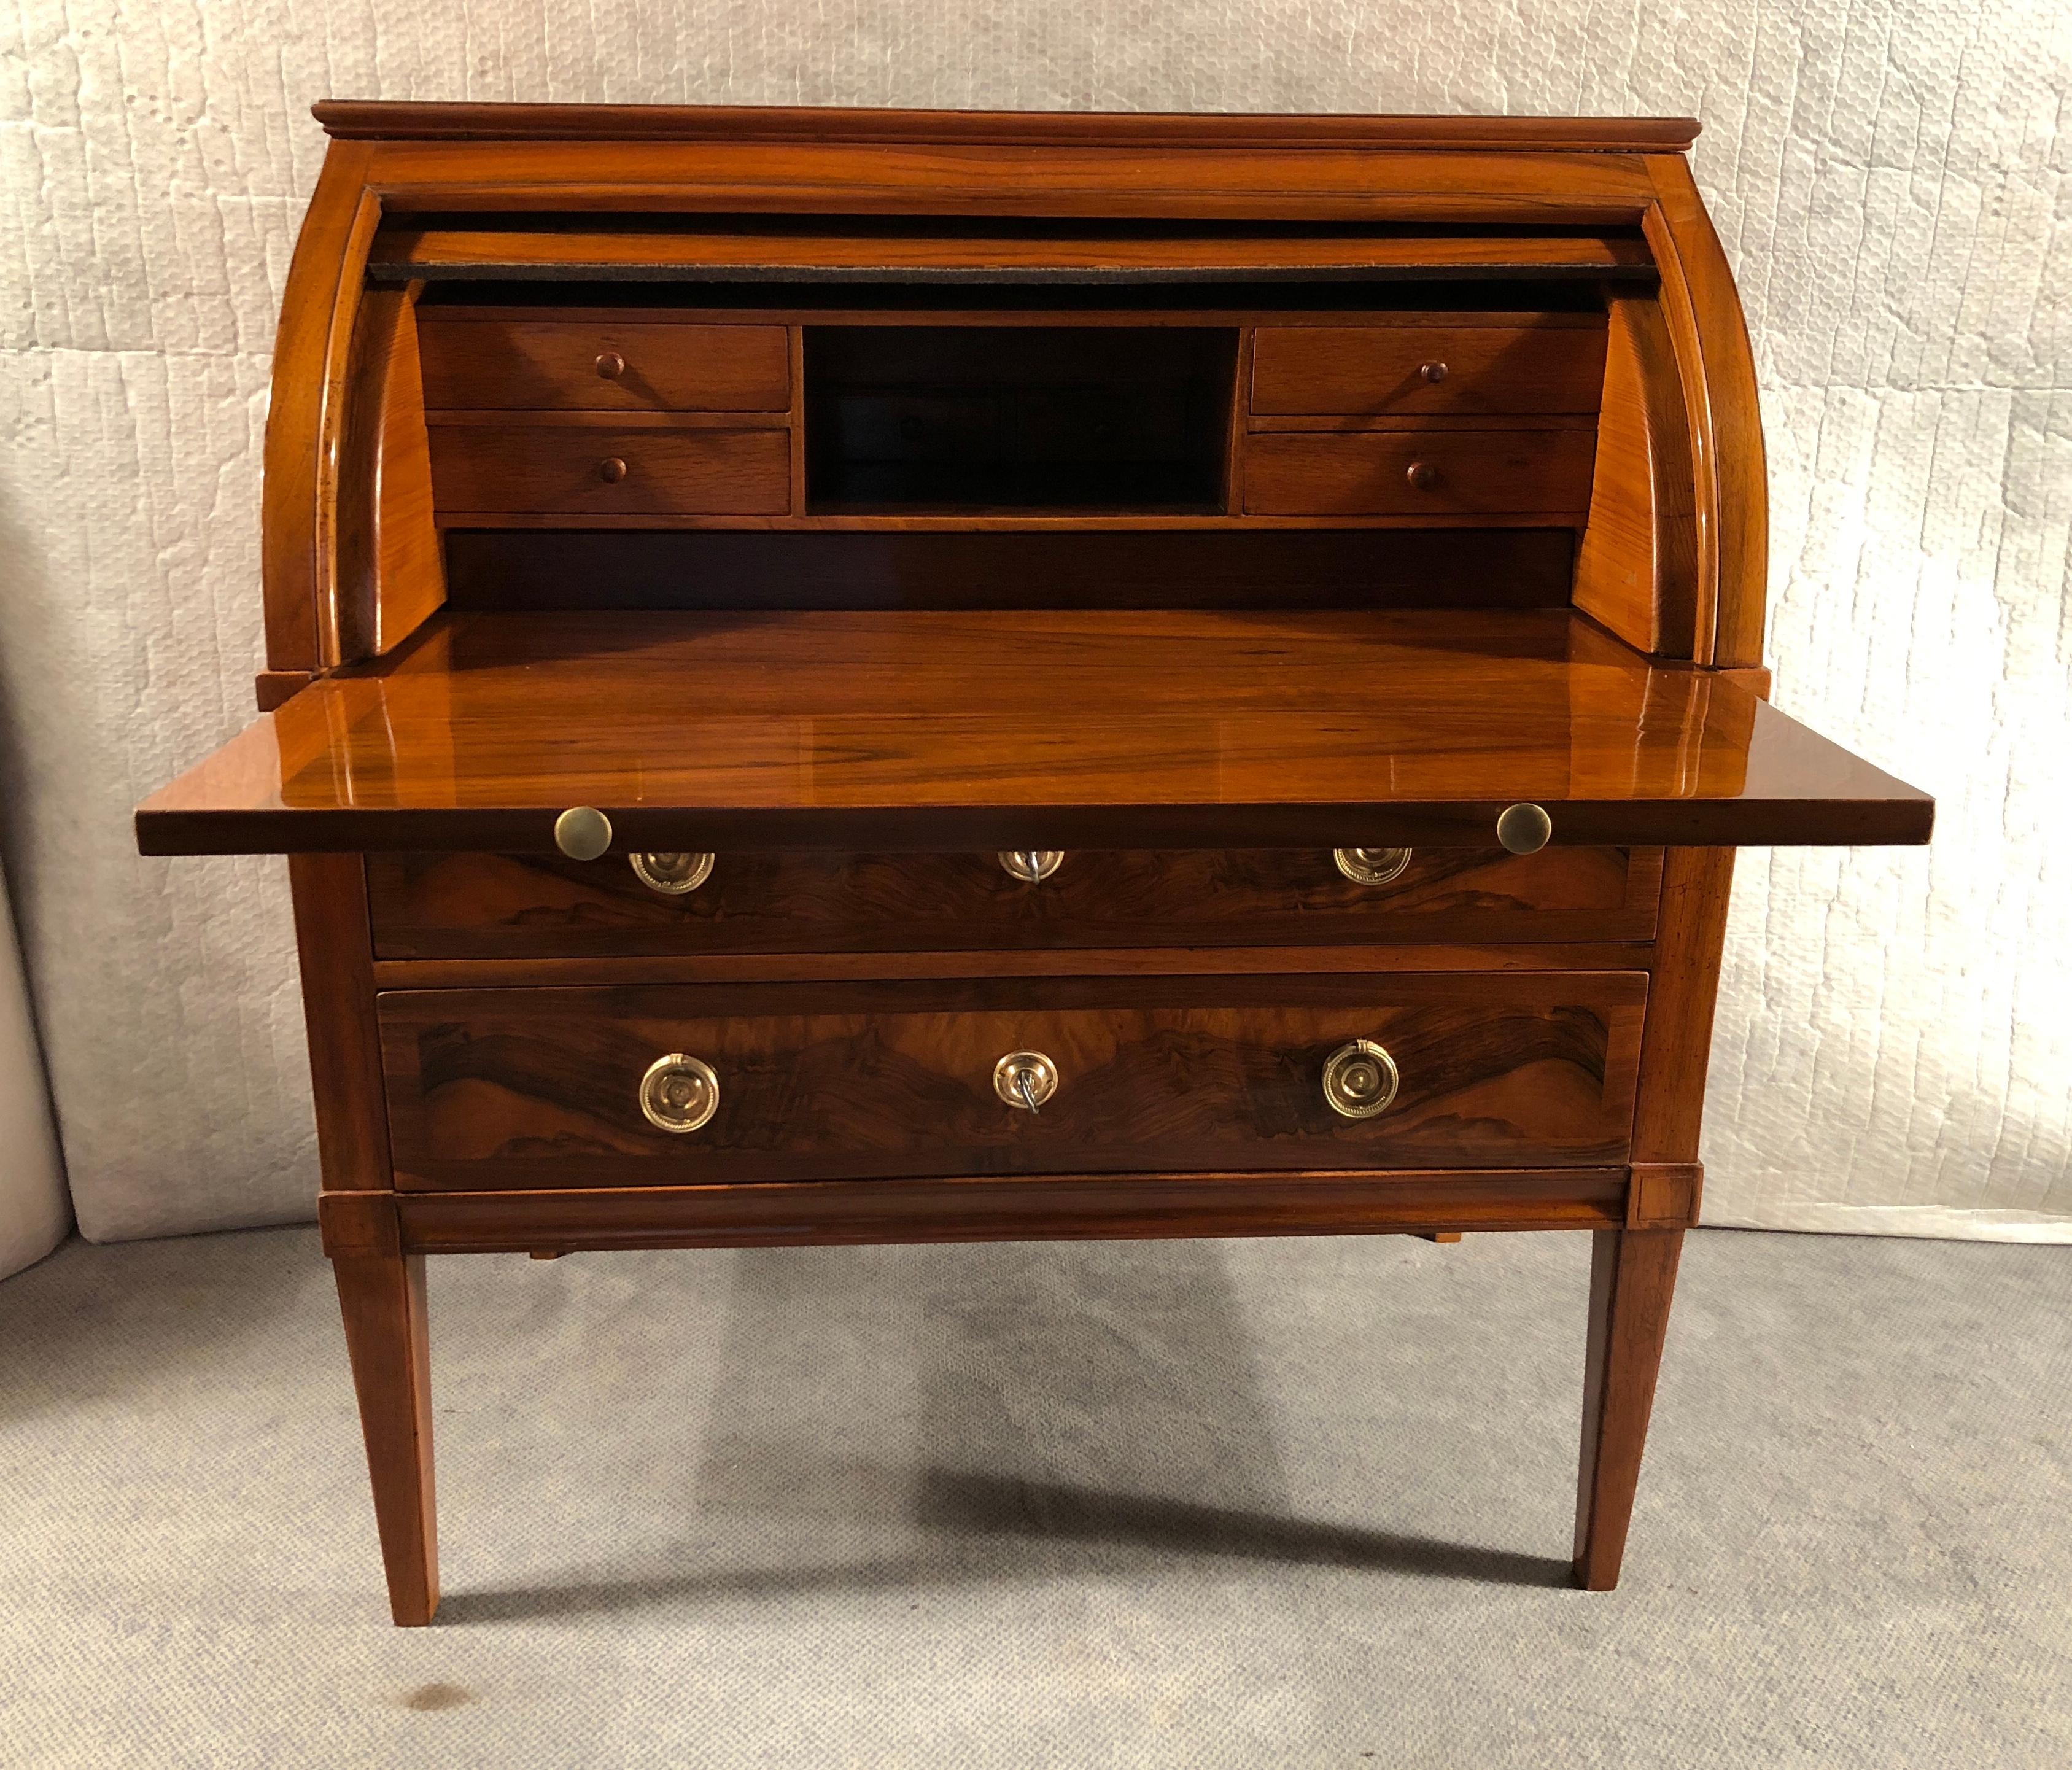 Exquisite Louis XVI Cylinder Desk, South German, 1780-1800, with beautiful walnut veneer on the outside and on the inside, including the writing surface. The outside of the roll top stands out for its mirrored burled walnut veneer. Original bronze